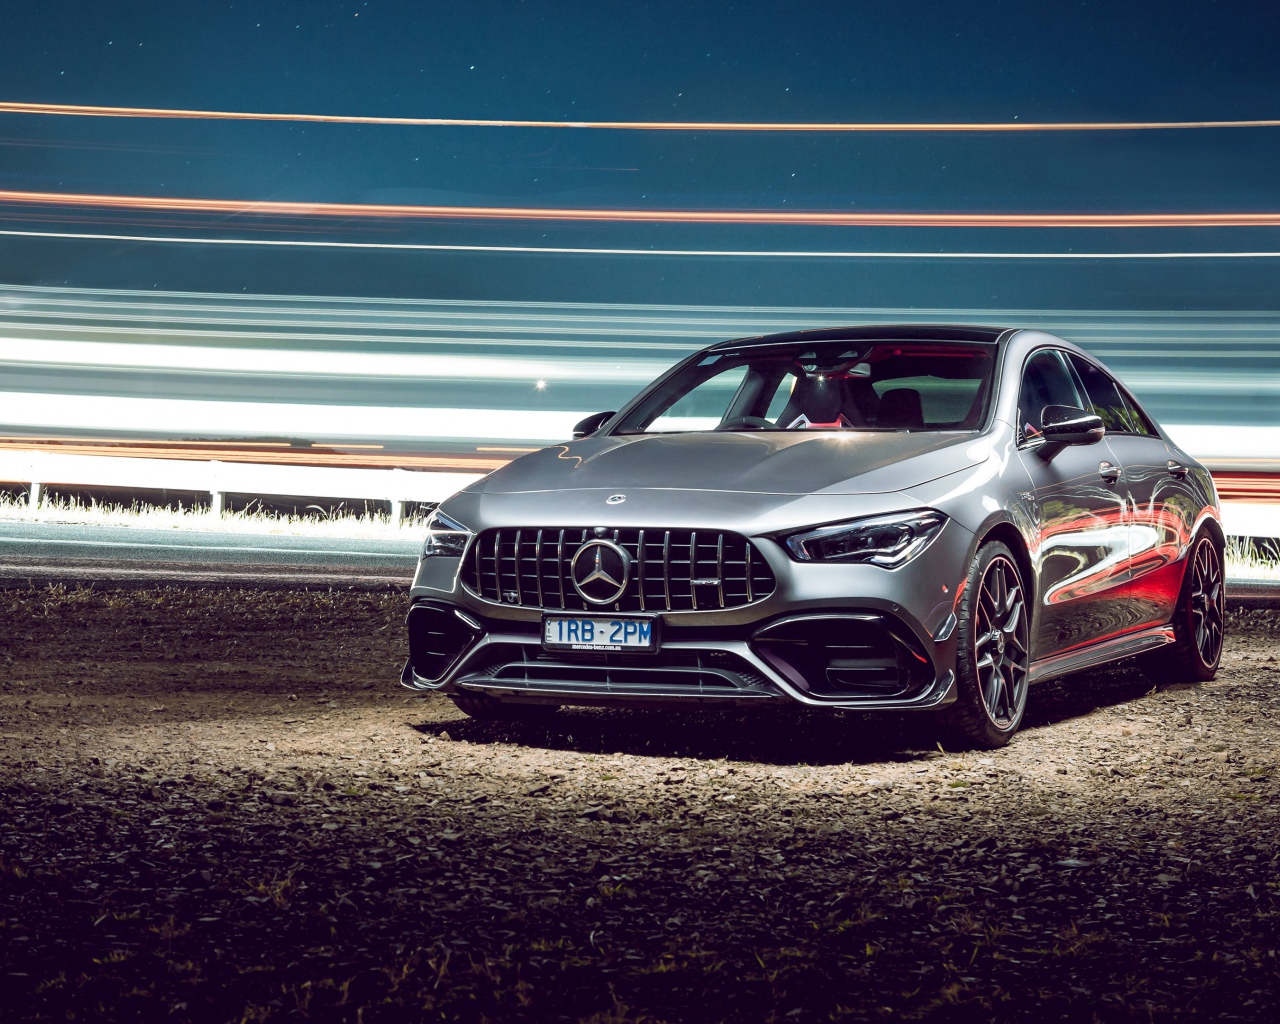 Silver car Mercedes-AMG CLA 45 S 4MATIC, 2020 off the track